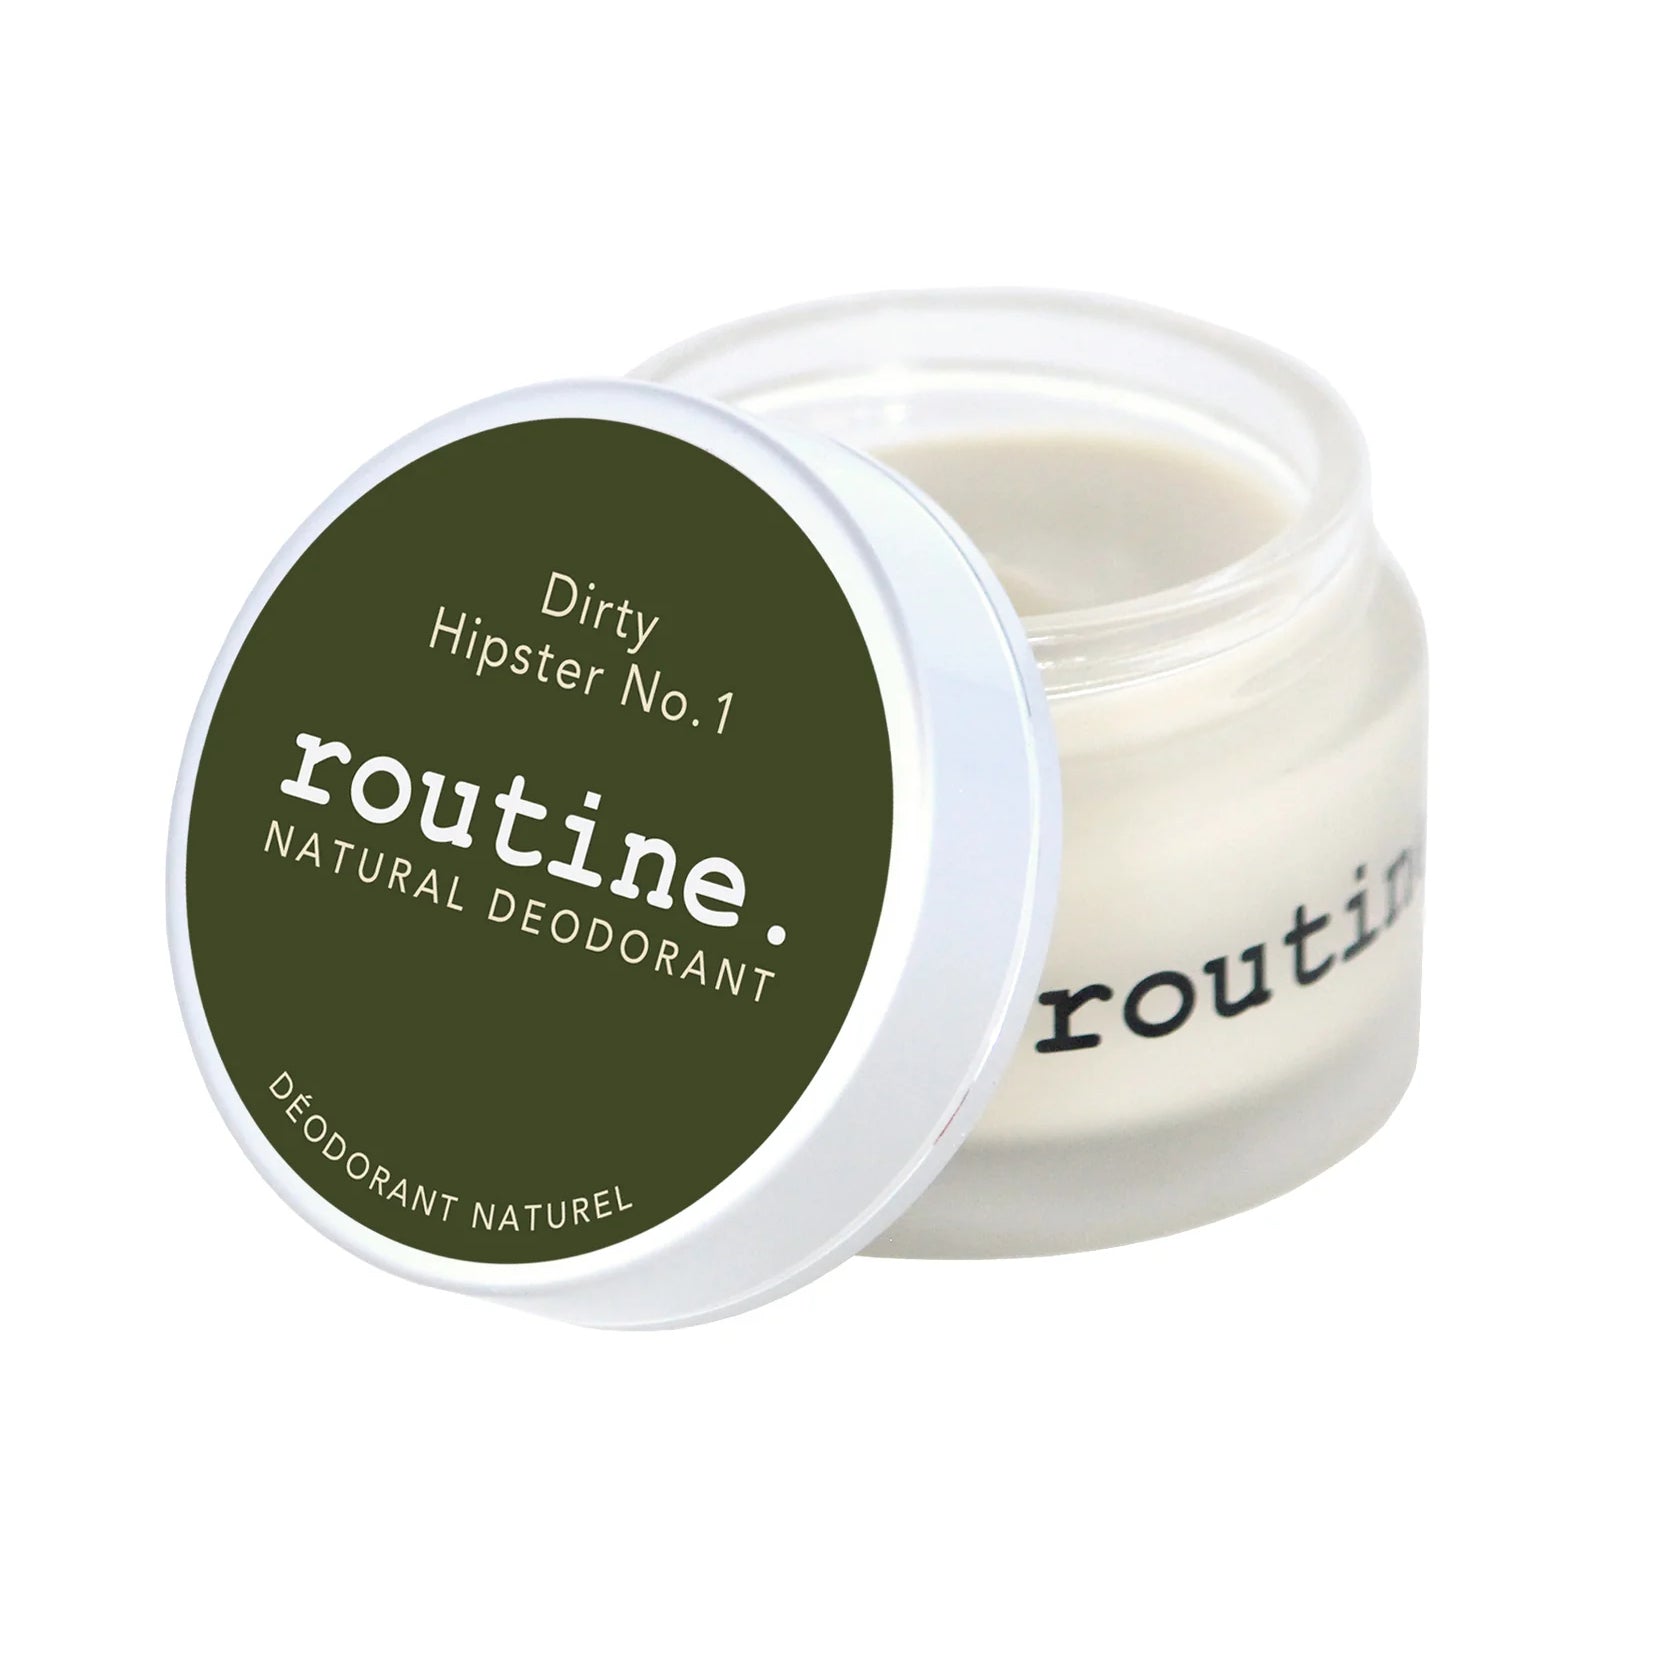 Routine Dirty Hipster Natural Deodorant